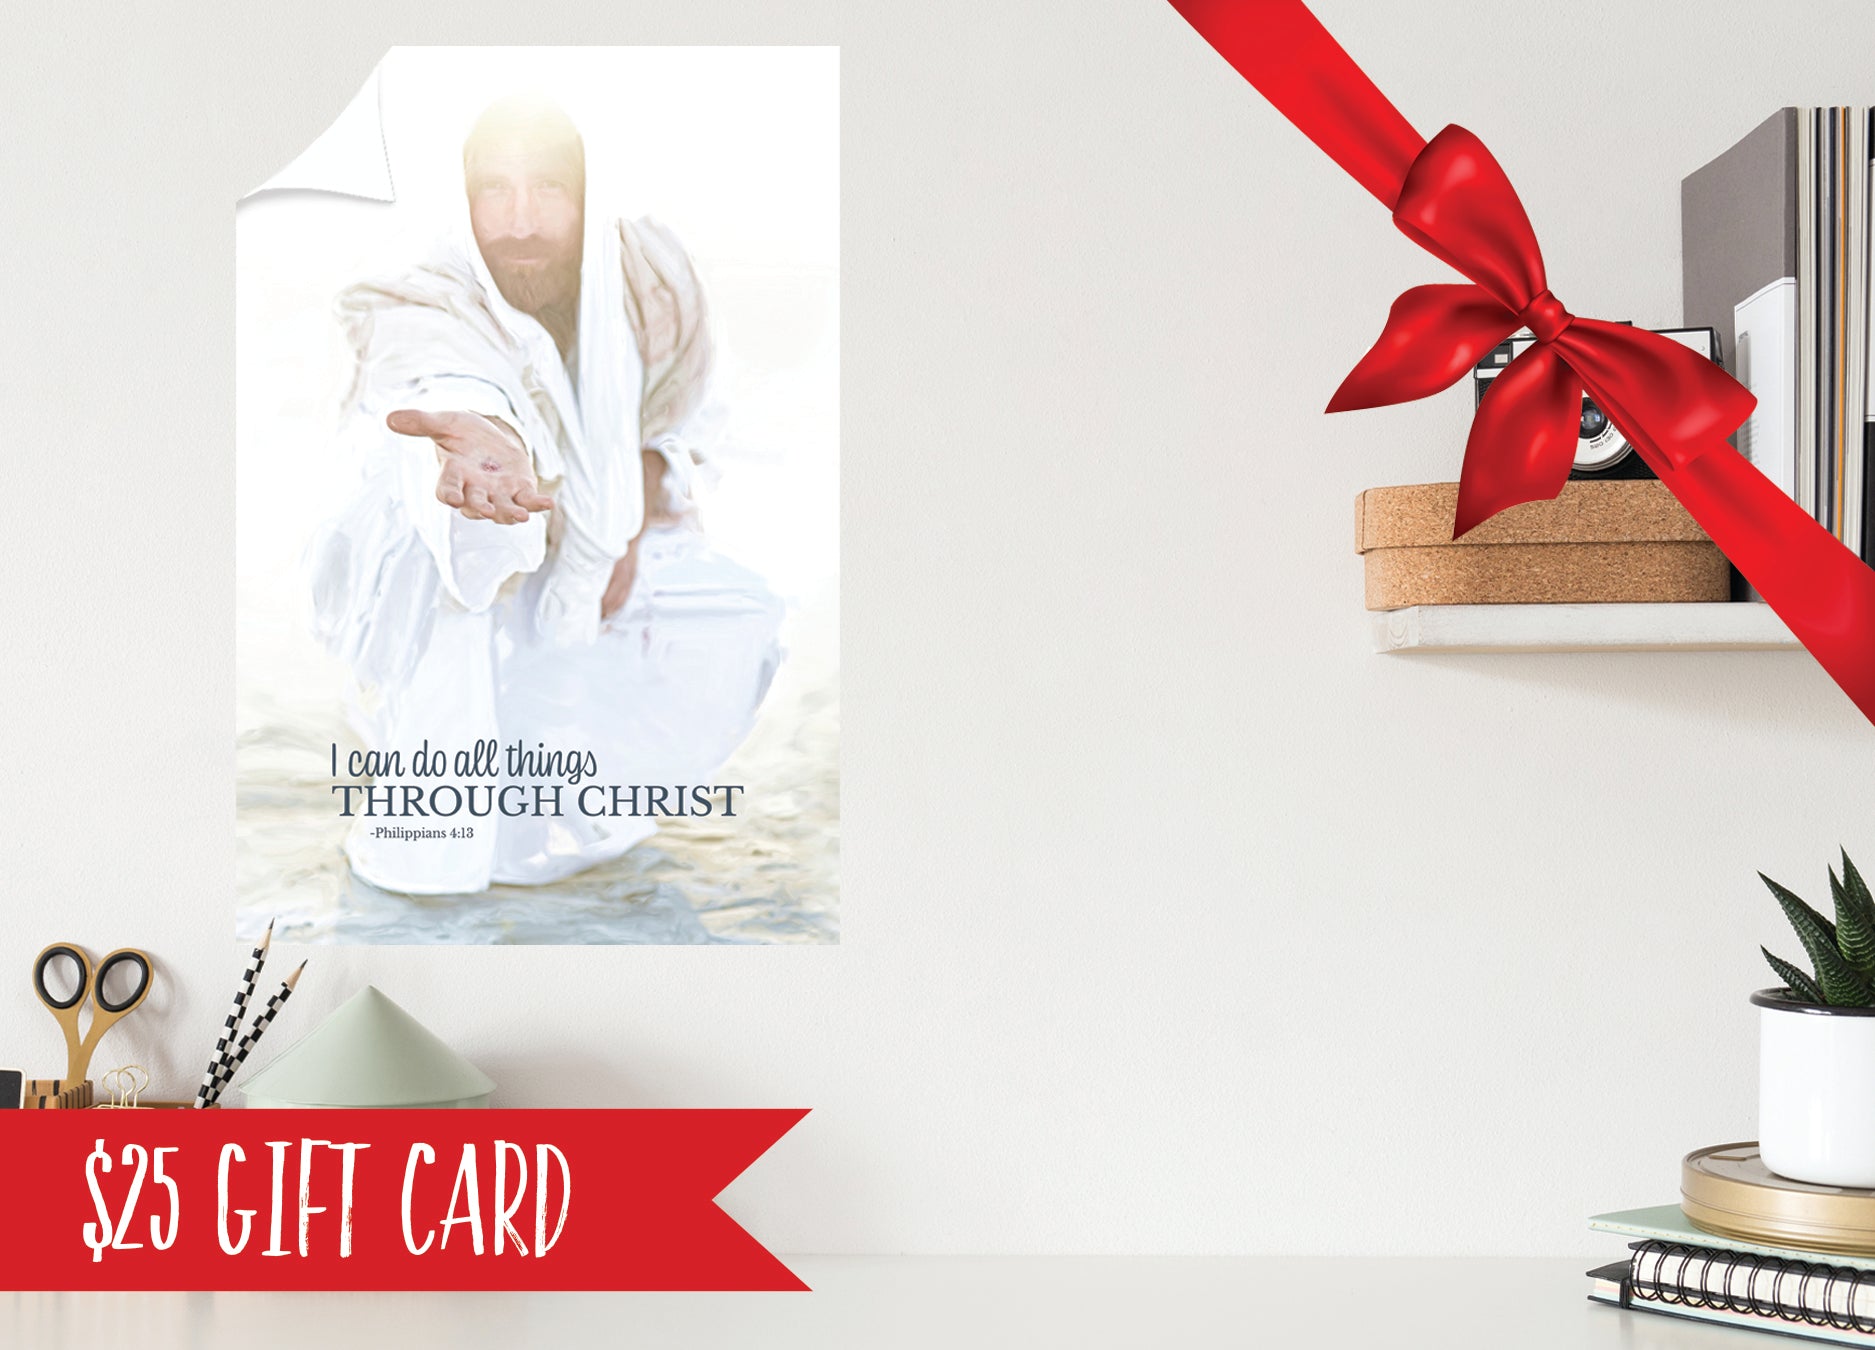   eGift Card - Christmas Presents: Gift Cards